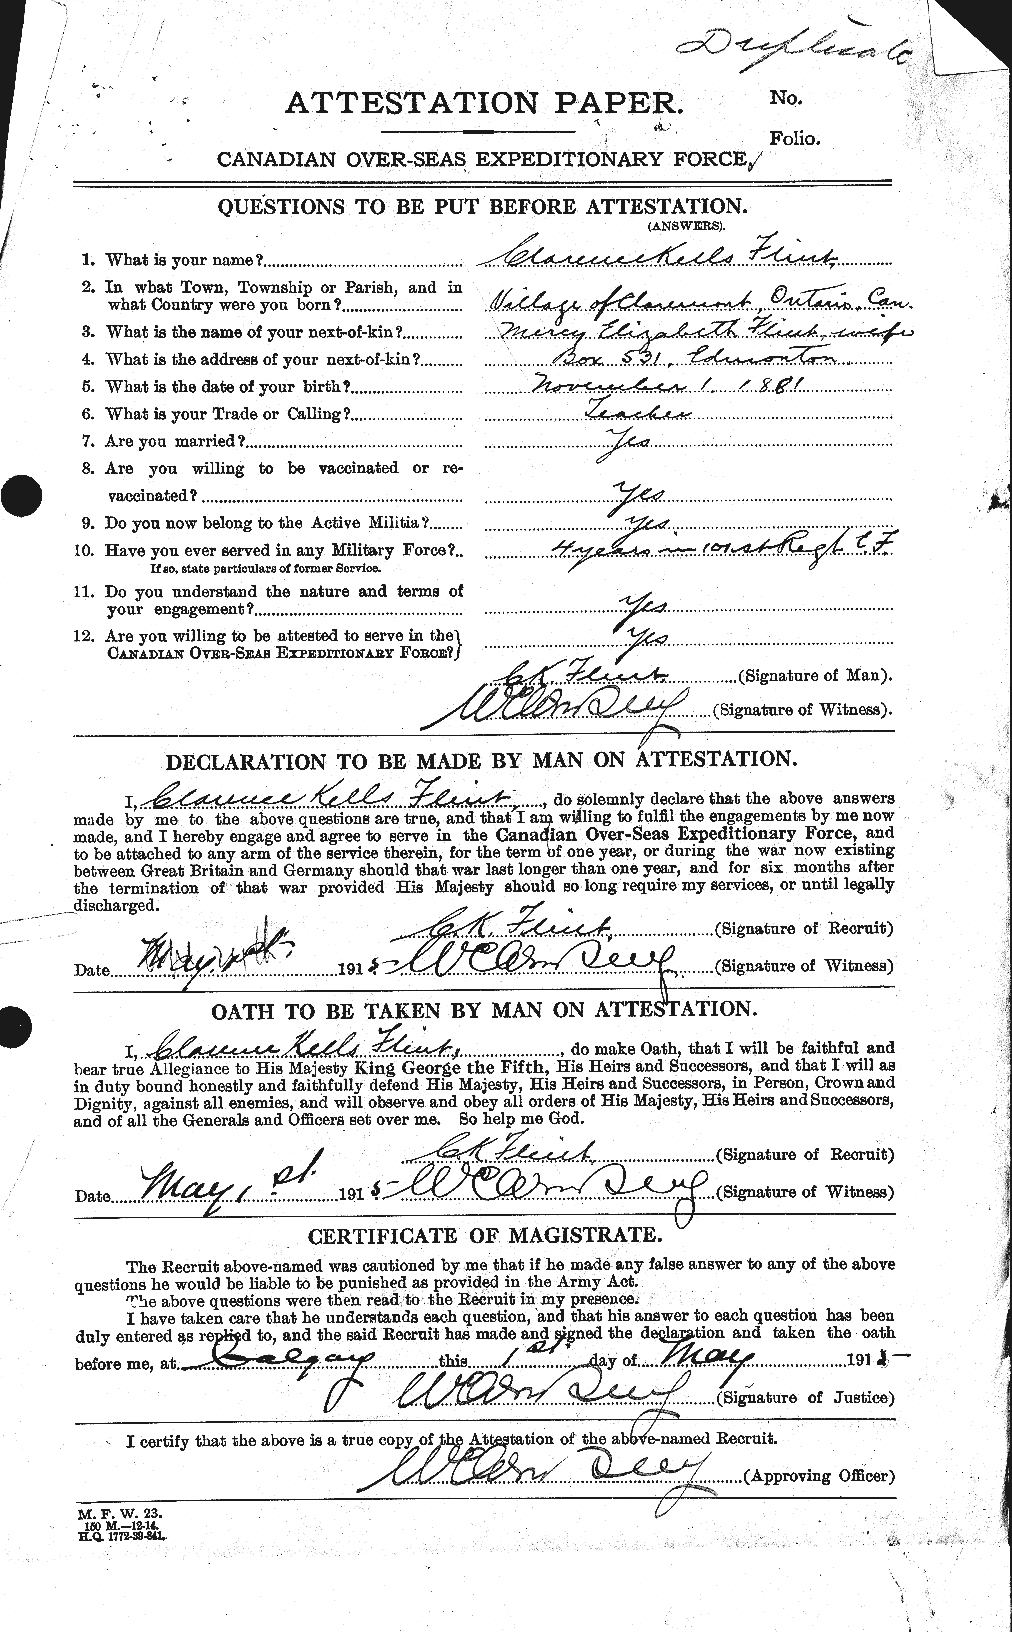 Personnel Records of the First World War - CEF 331167a